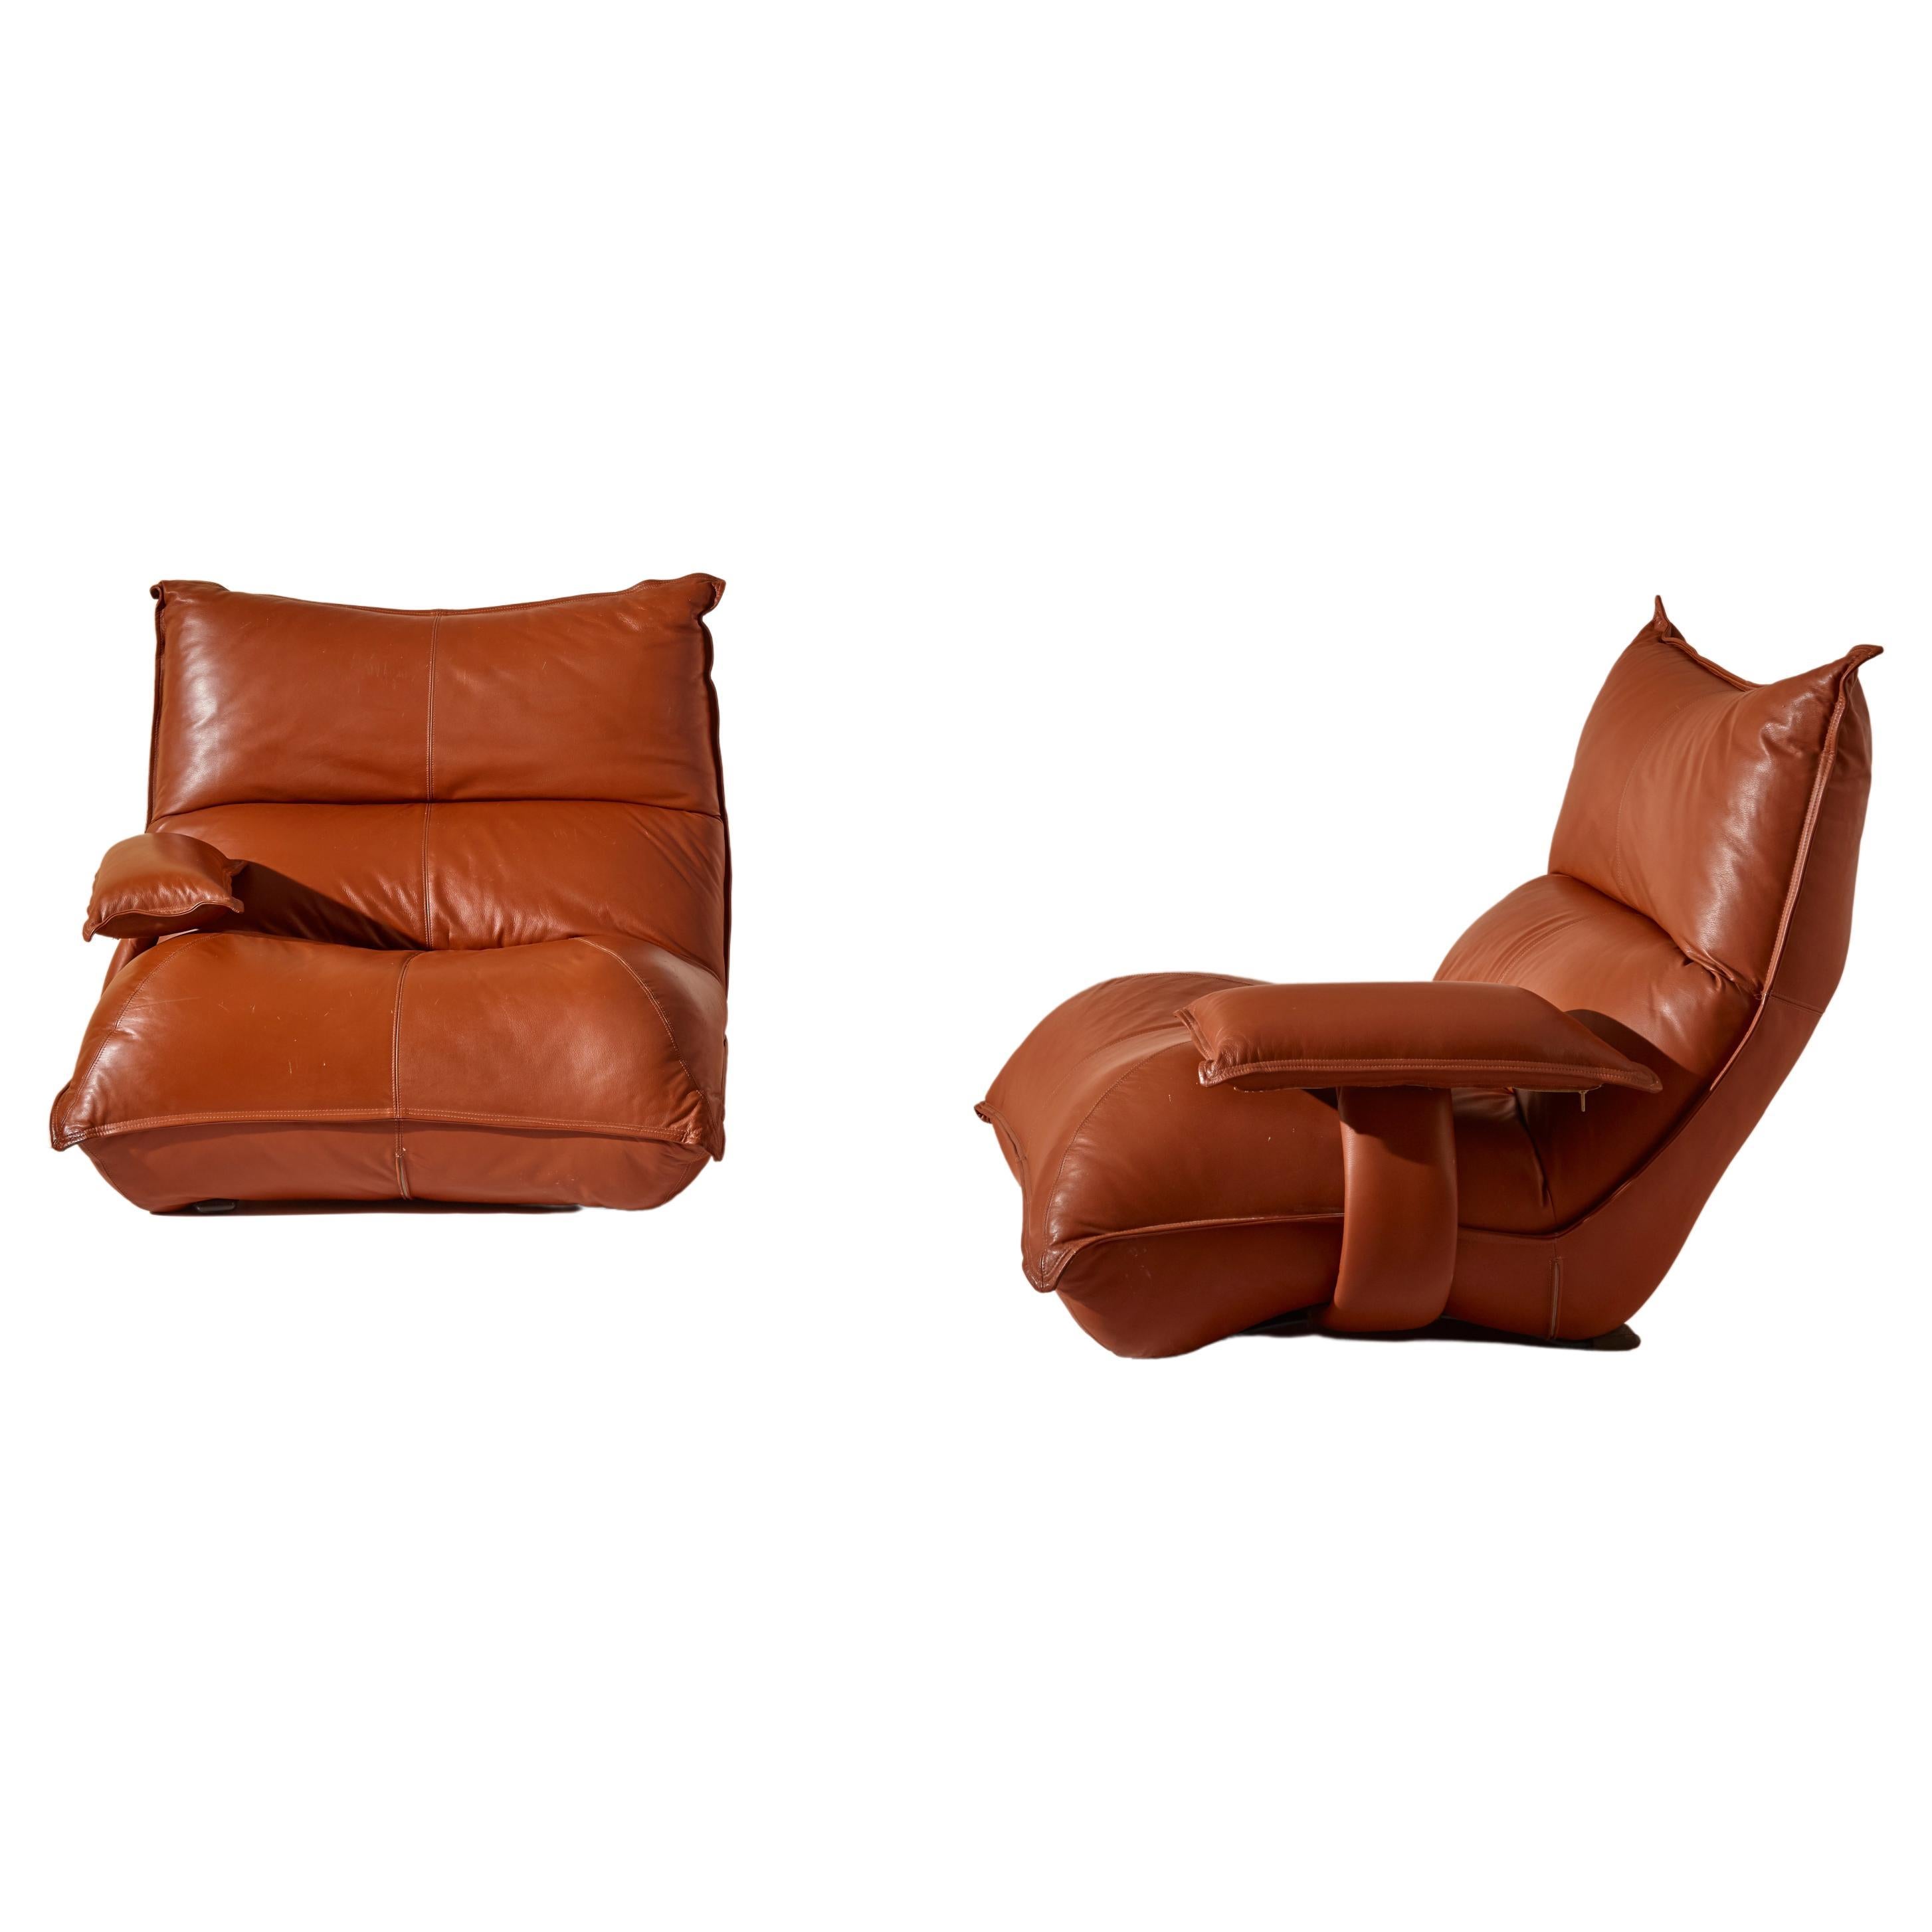 Vittorio Varo Pair of Leather Zinzolo Armchairs for Plan Interior Design, Italy For Sale